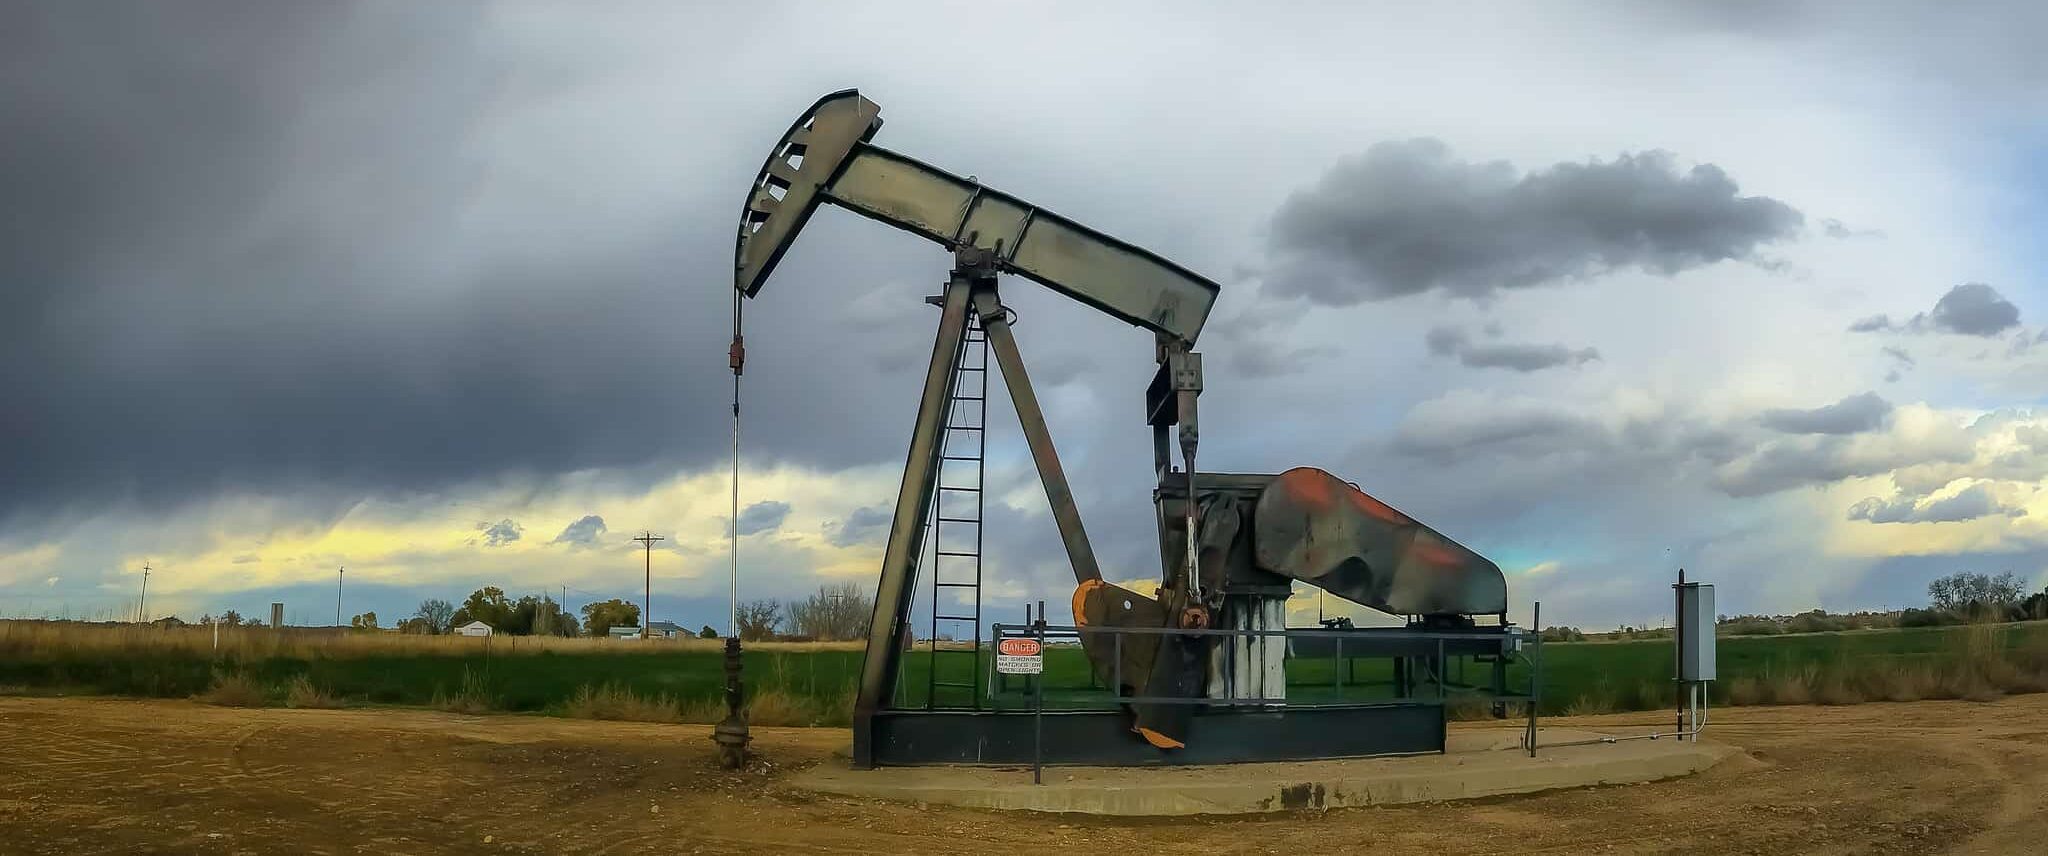 Oil Well in Colorado in foreground, moody grey sky in the background.